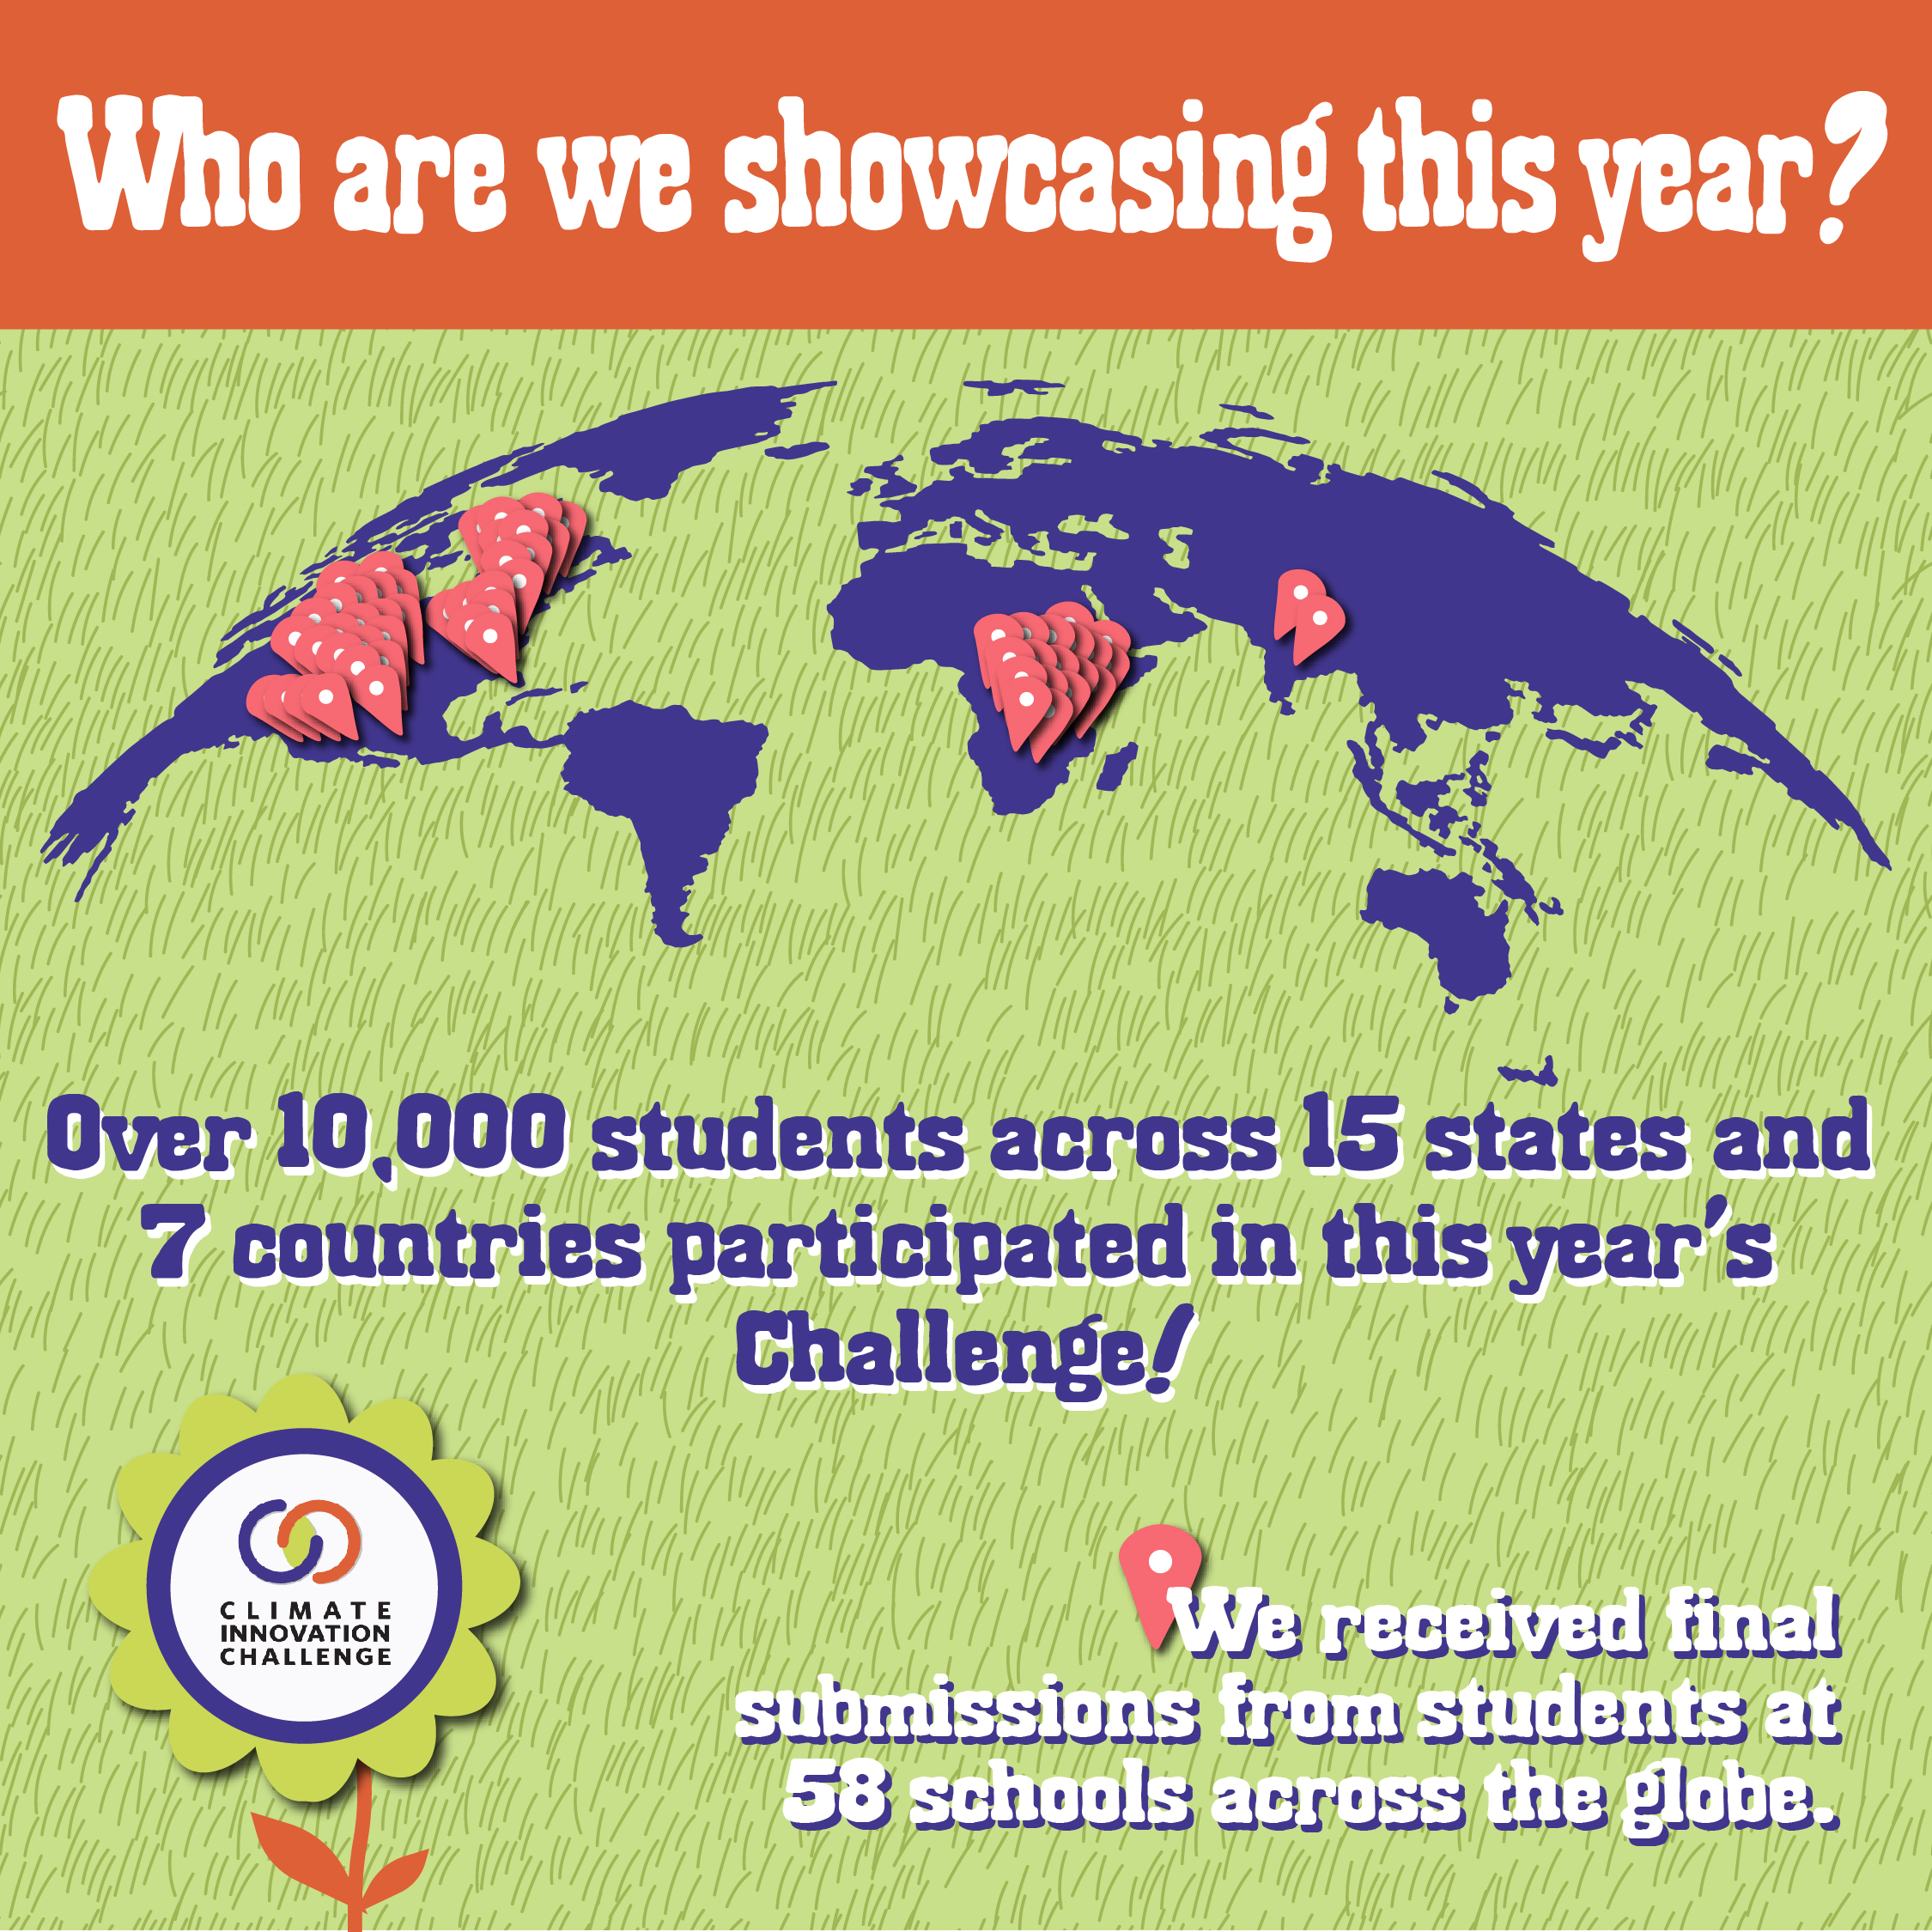 We're showcasing over 58 schools from around the globe. Over 10,000 students across 15 states and 7 countries participated in this year's Challenge.